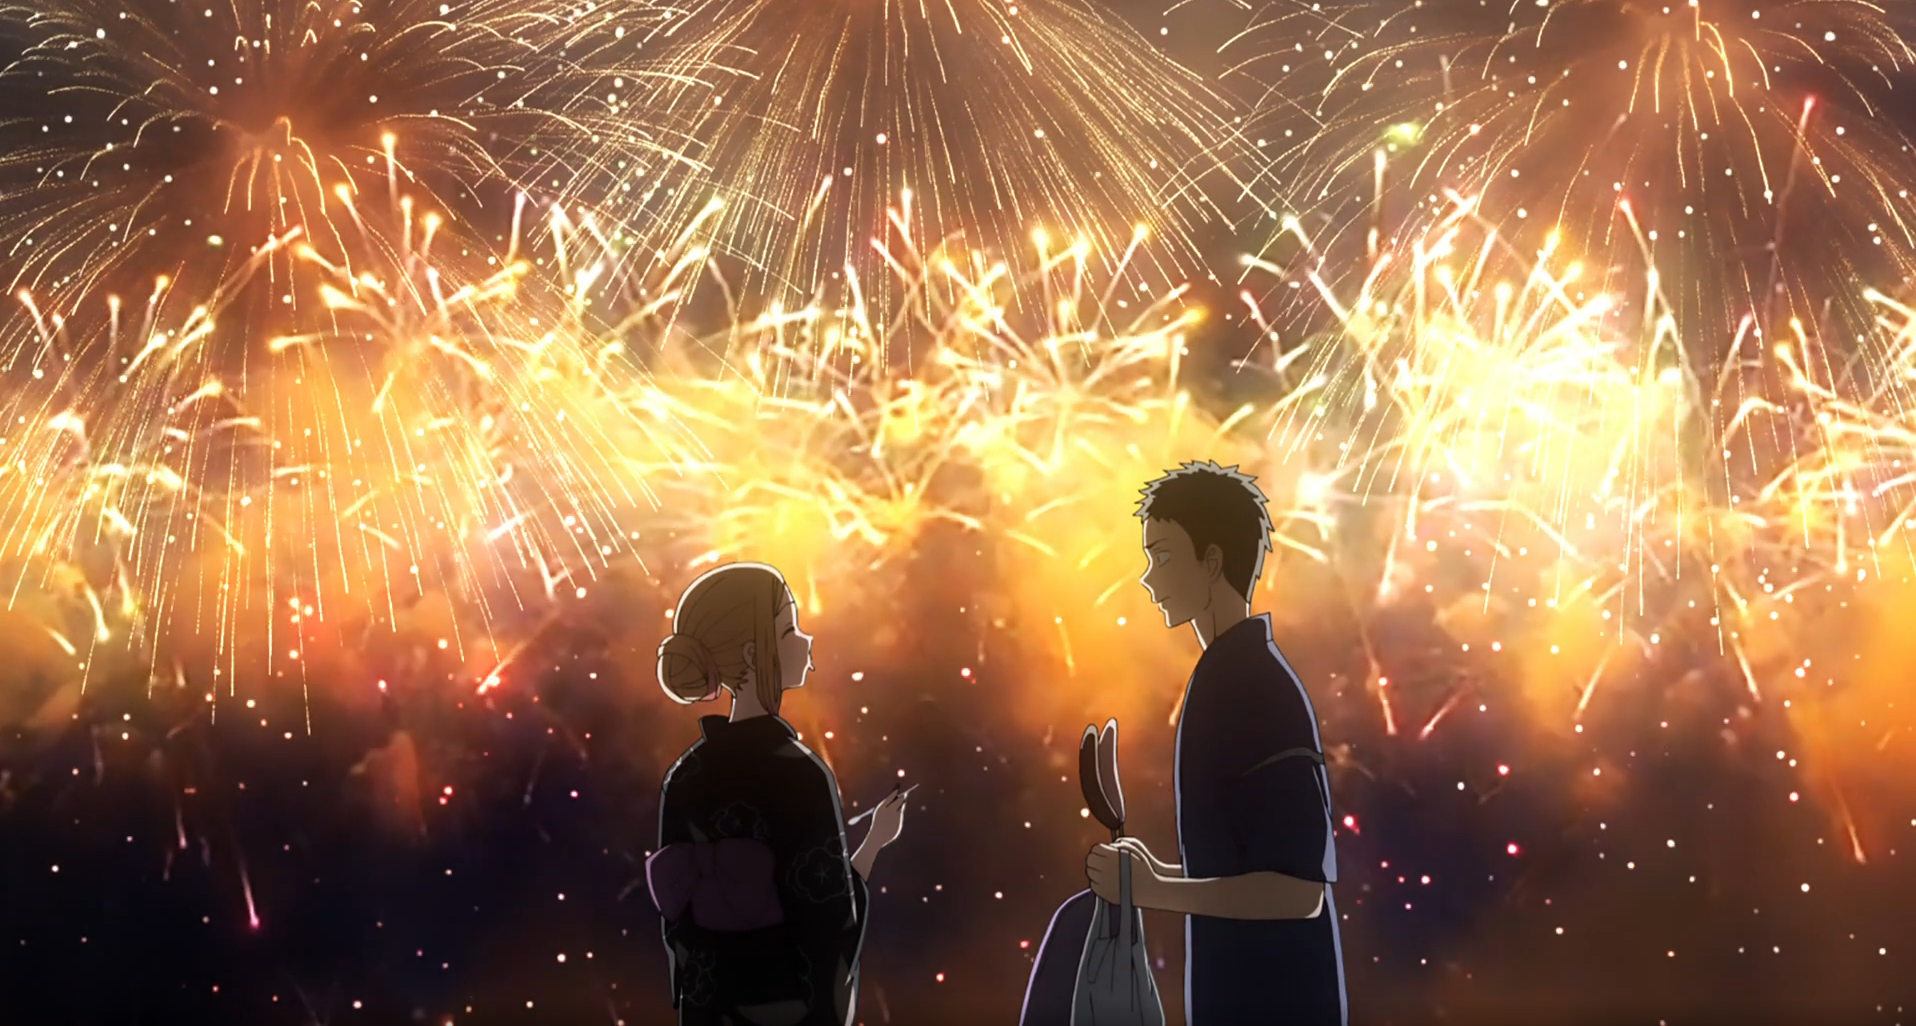 My Dress Up Darling Episode 12: Gojo and Marin watching the fireworks during the summer festival